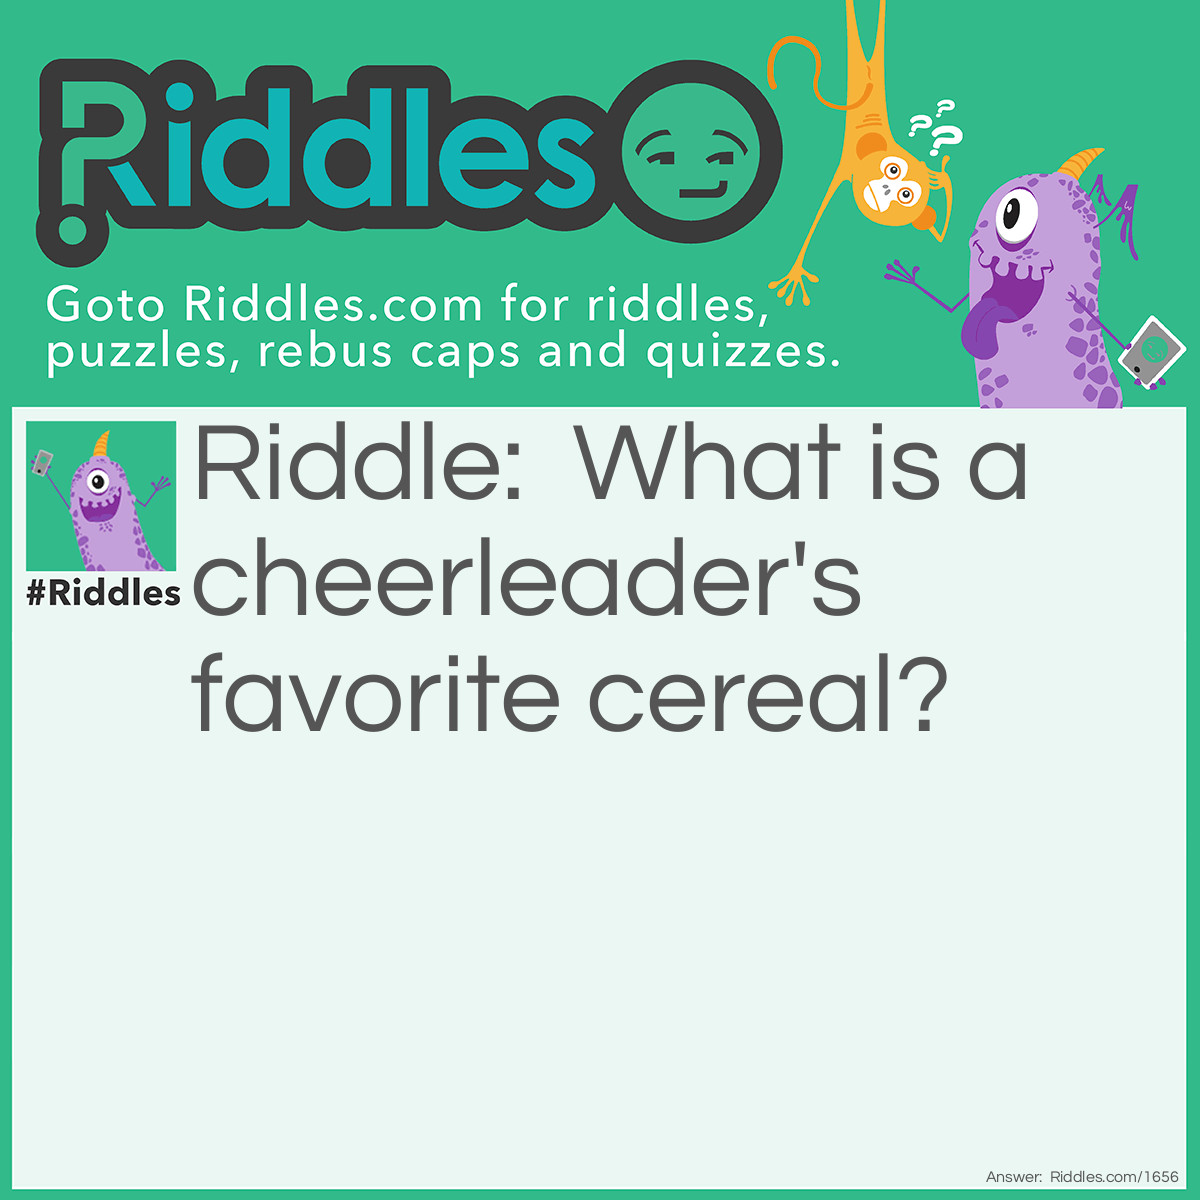 Riddle: What is a cheerleader's favorite cereal? Answer: Cheerios!